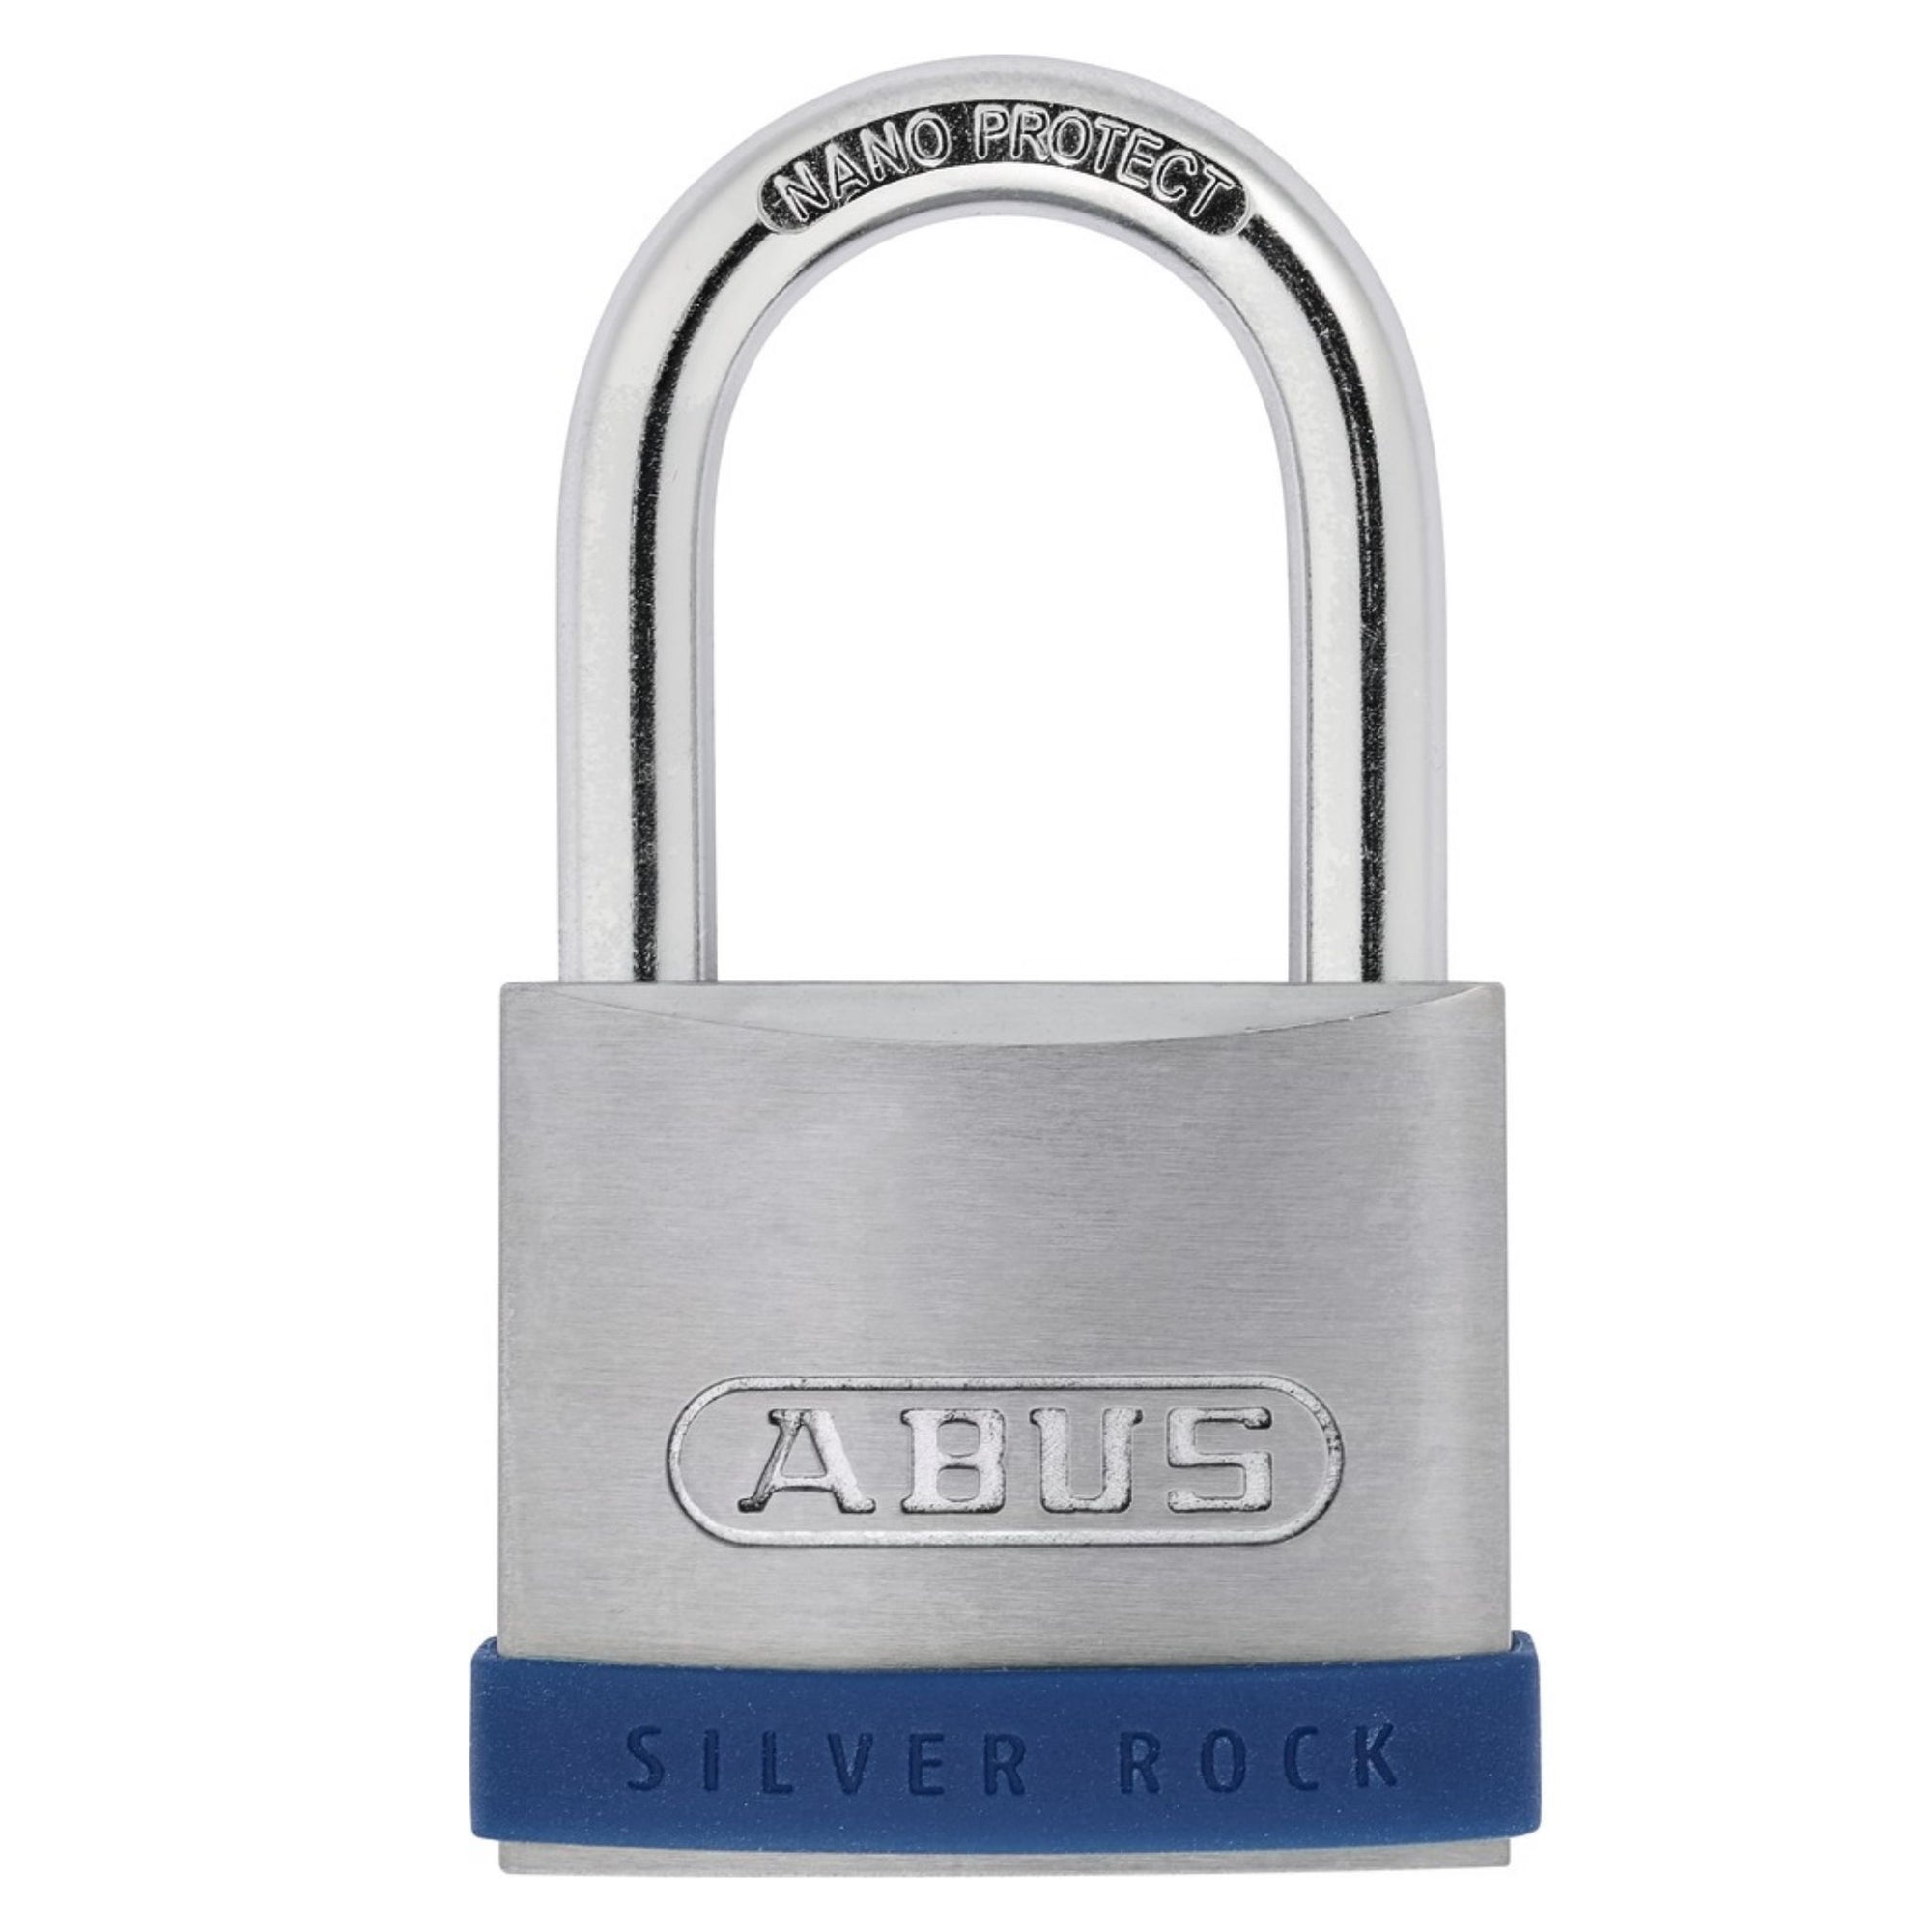 Abus 5/50HB25 KD Padlock Silver Rock Zinc Locks Keyed Different for Toolbox Security - The Lock Source